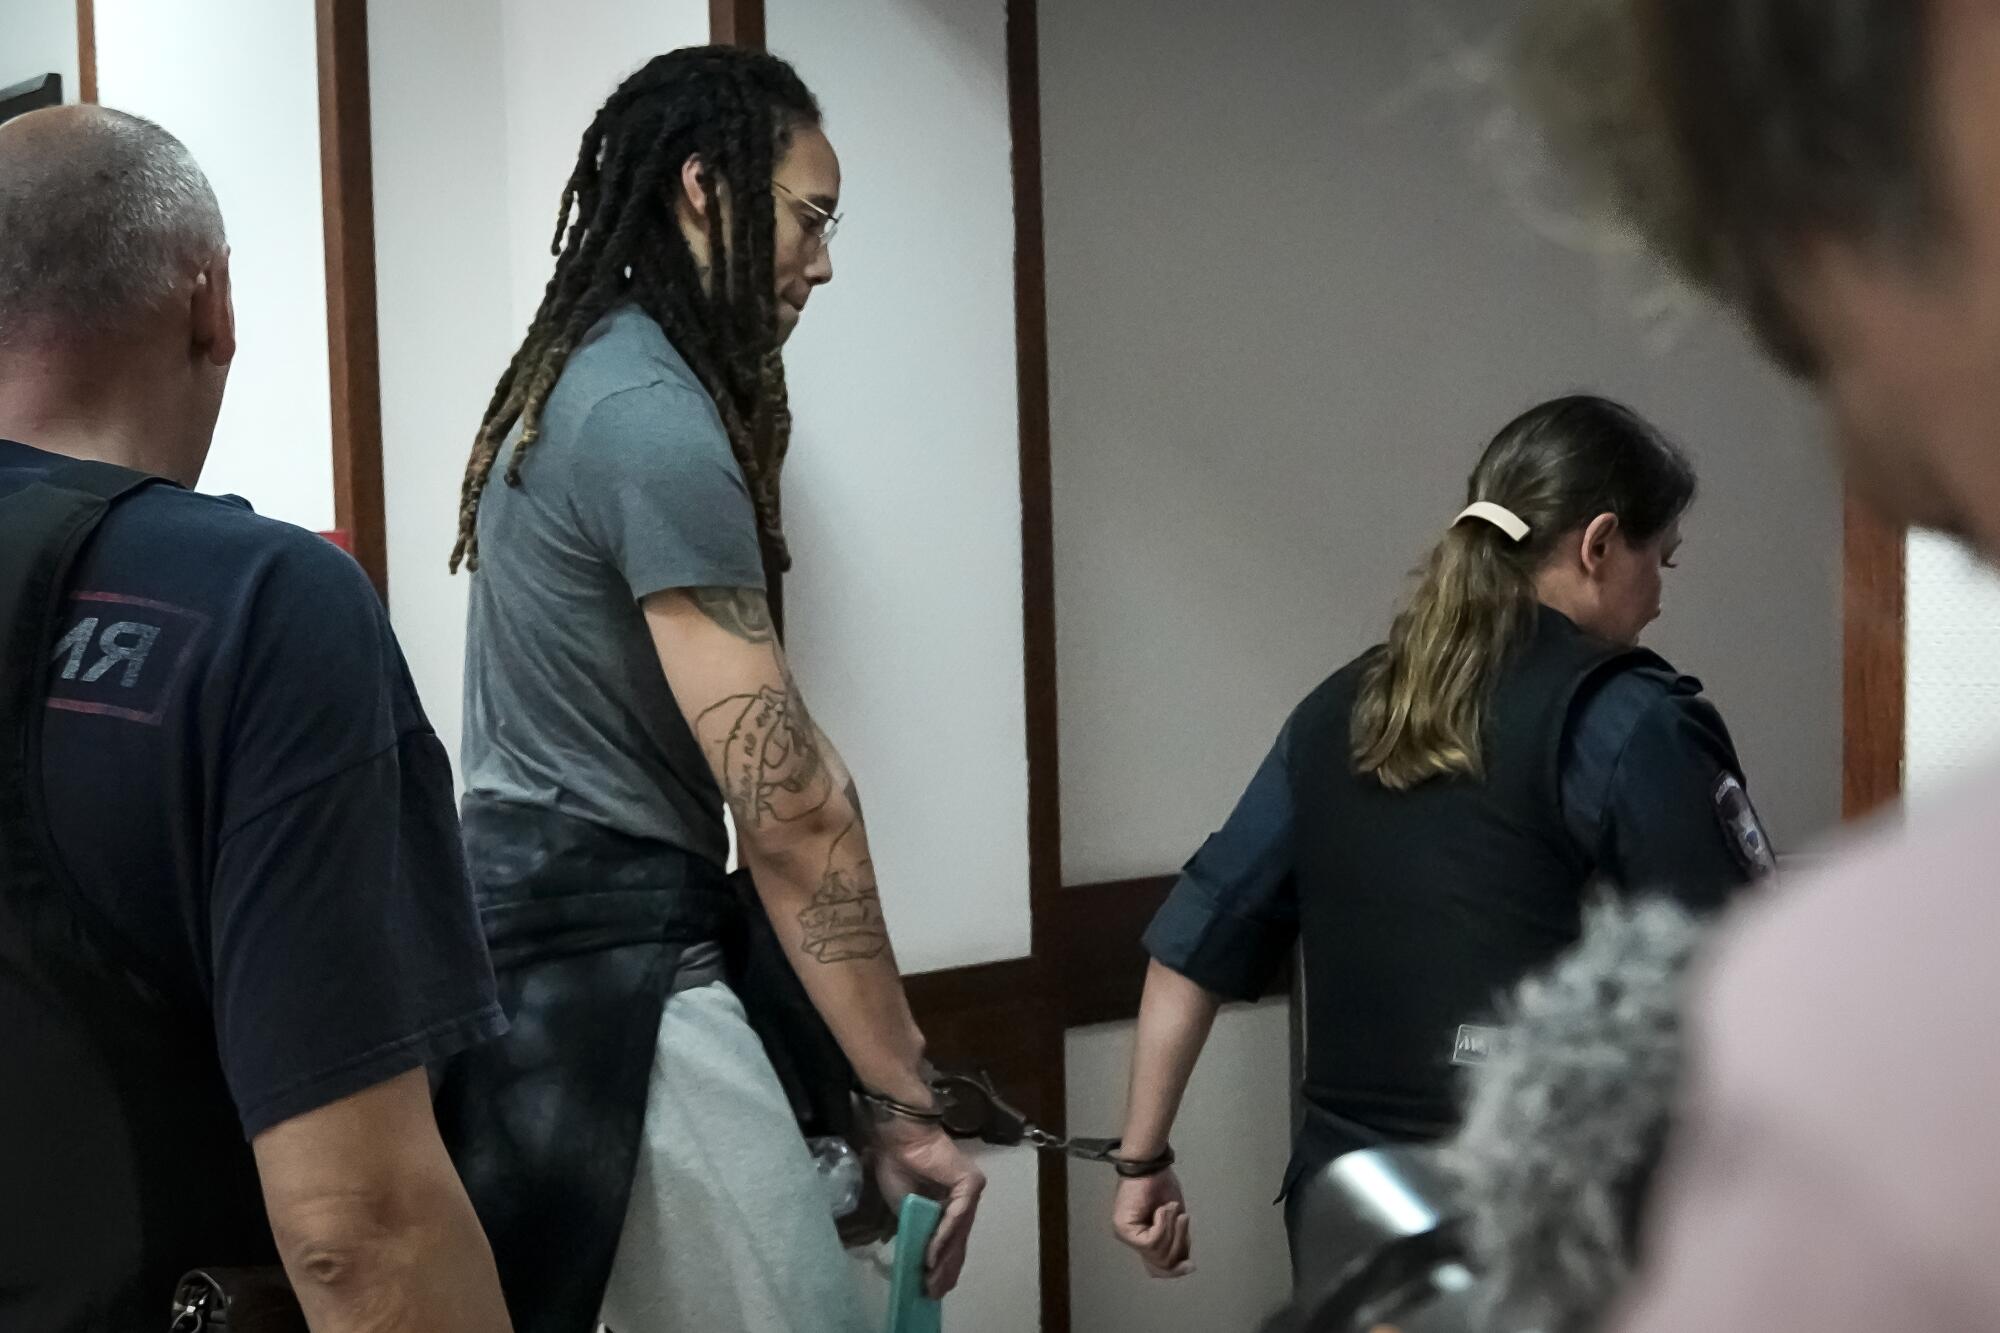 Griner leaves a courtroom after a hearing, in Khimki just outside Moscow, Russia, Monday, June 27, 2022.